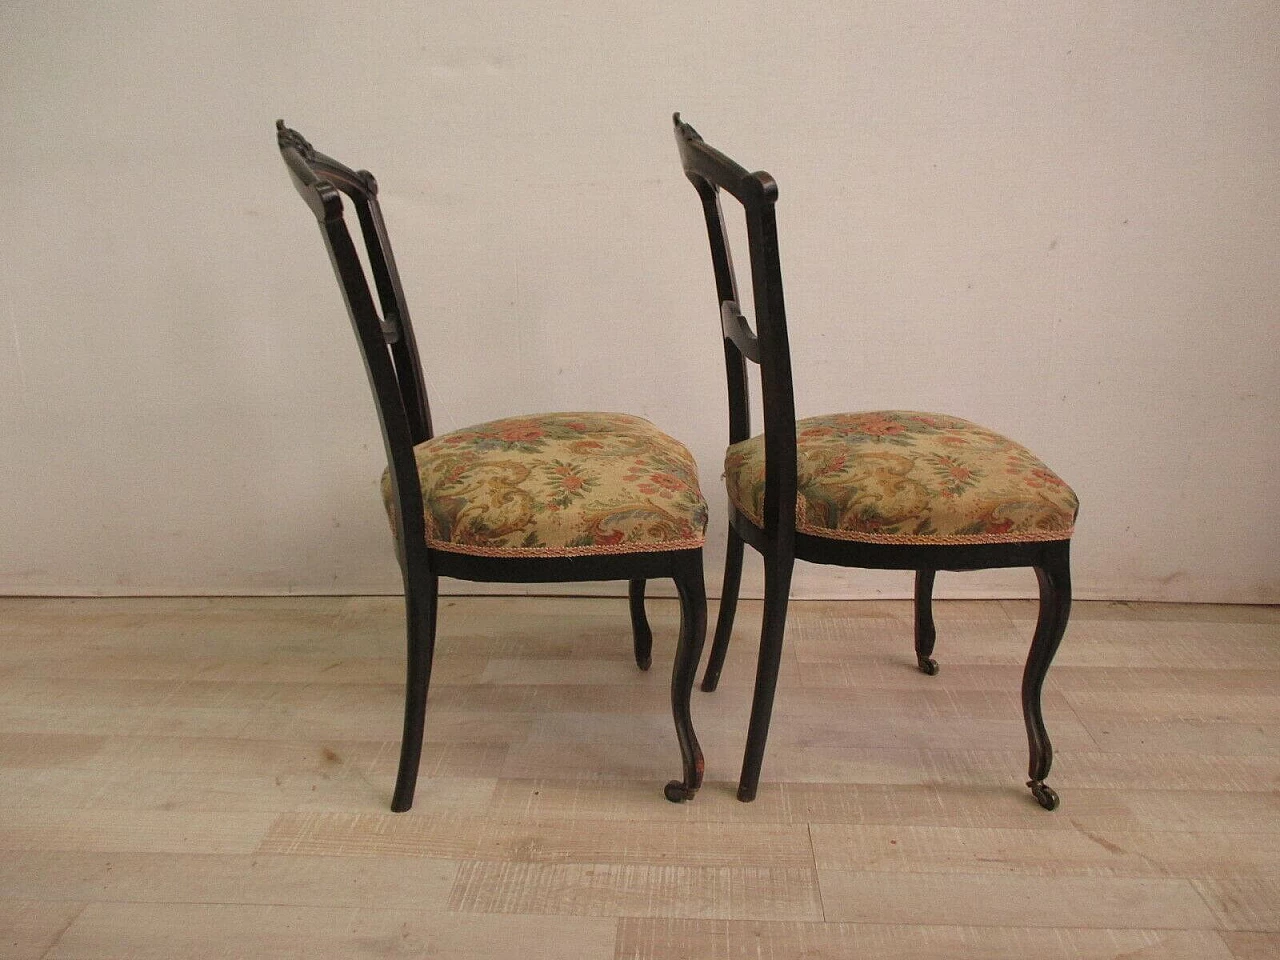 Pair of Umbertine chairs with casters in ebonised solid walnut and Gobelin fabric, 19th century 7